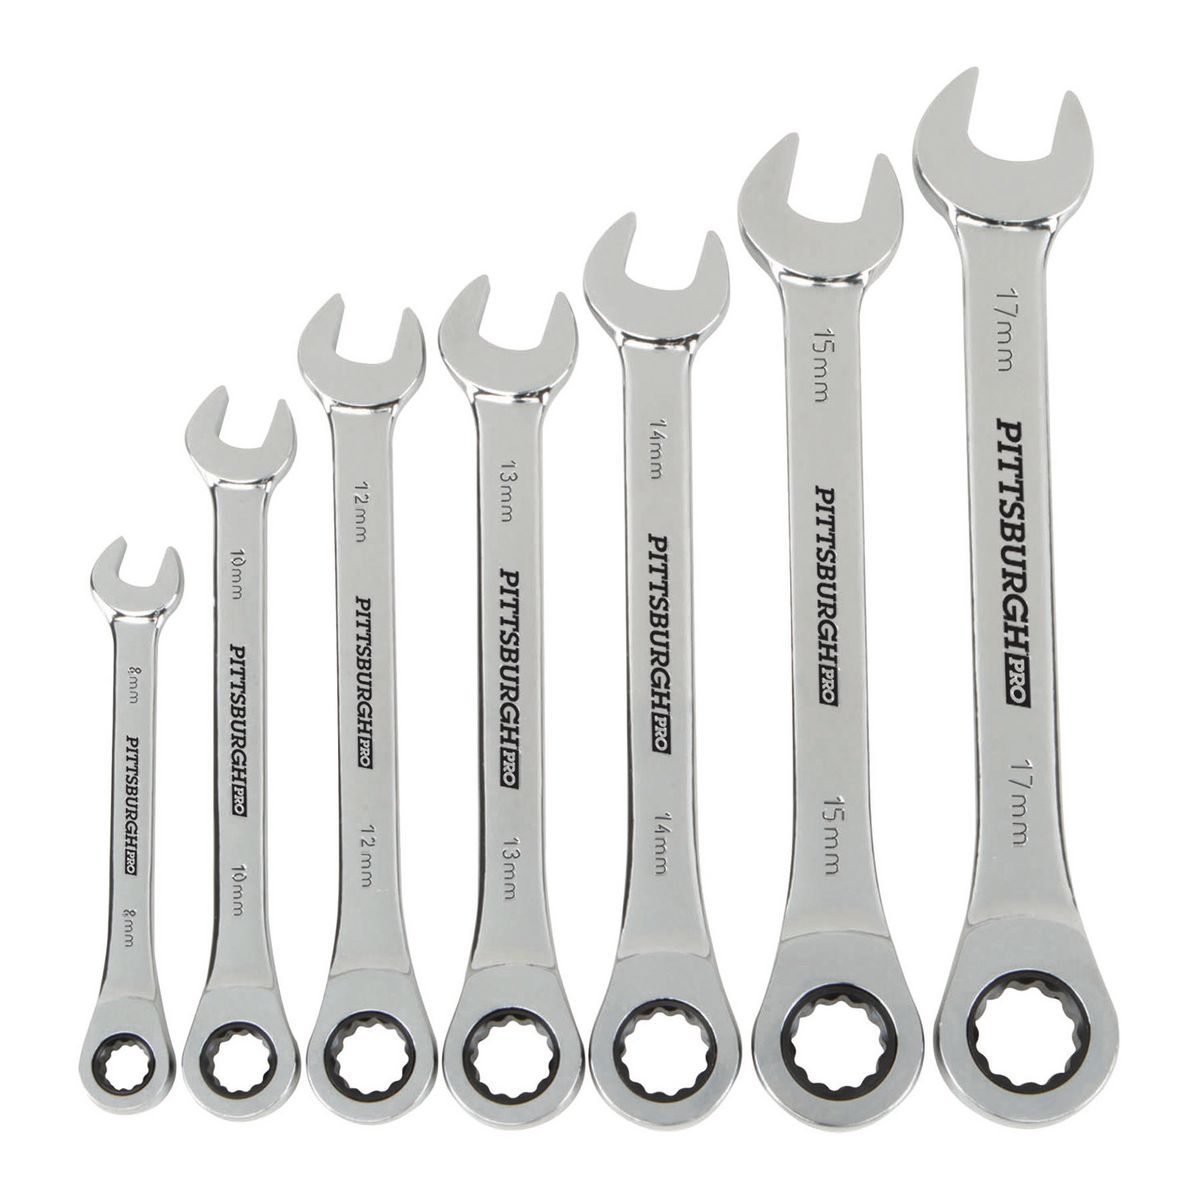 PITTSBURGH Metric Combination Ratcheting Wrench Set 7 Pc. - Item 95552 / 61400 / 62572 / 90263